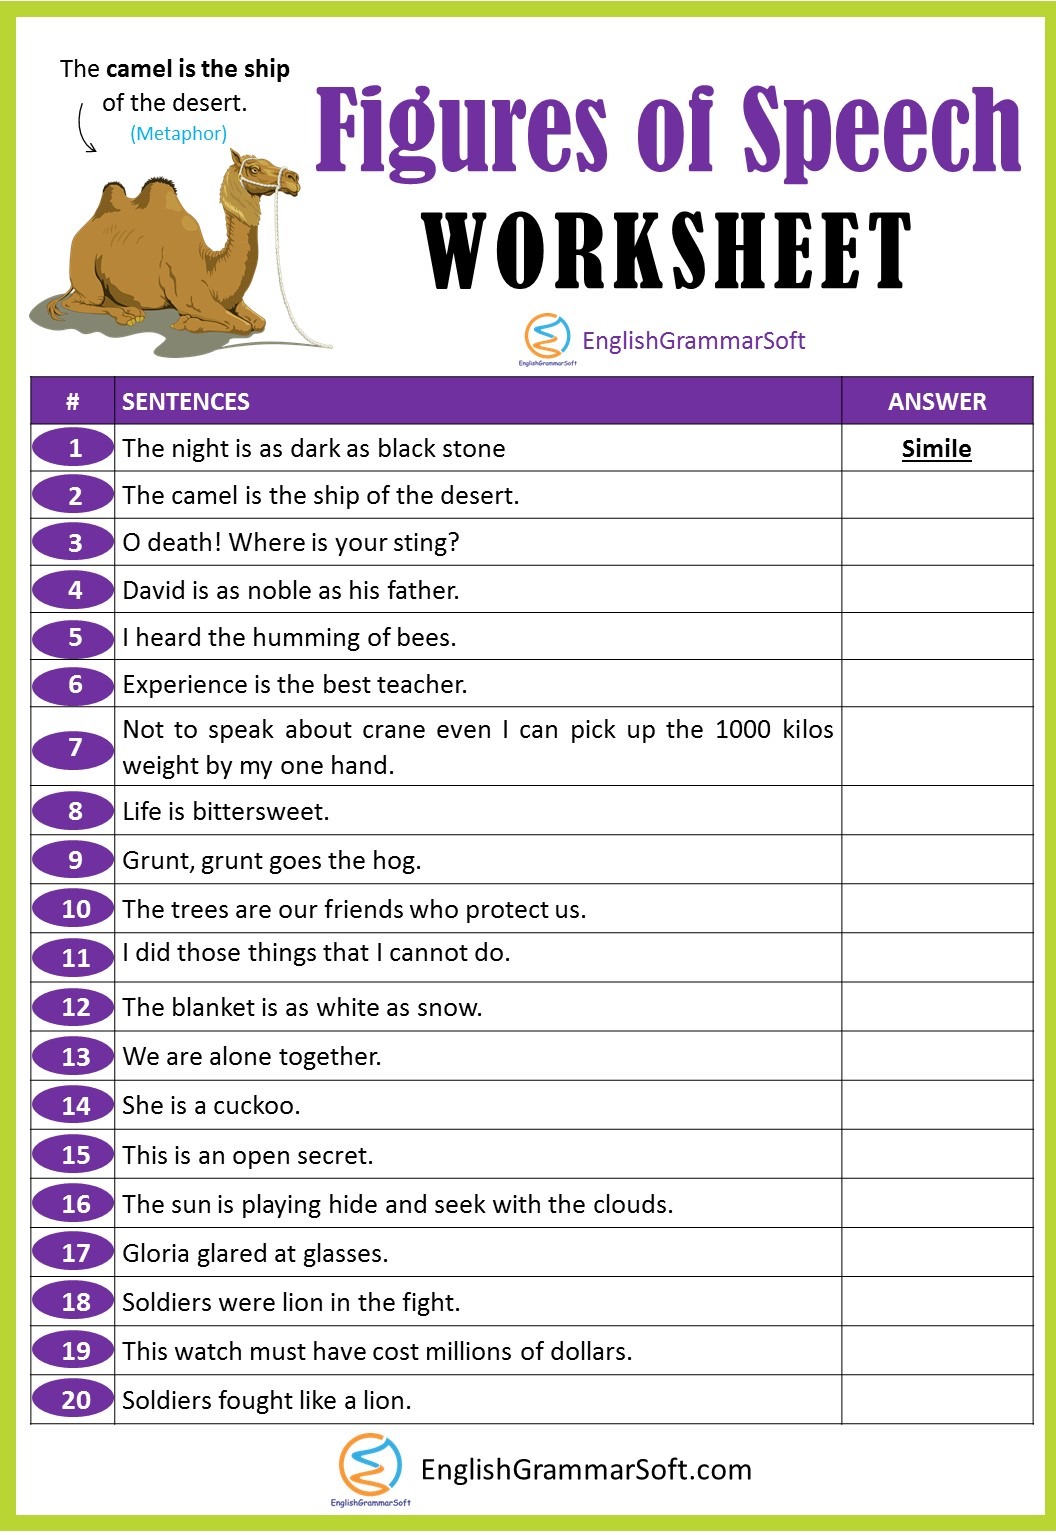 Figures of Speech Worksheet with Answers - EnglishGrammarSoft In Figures Of Speech Worksheet